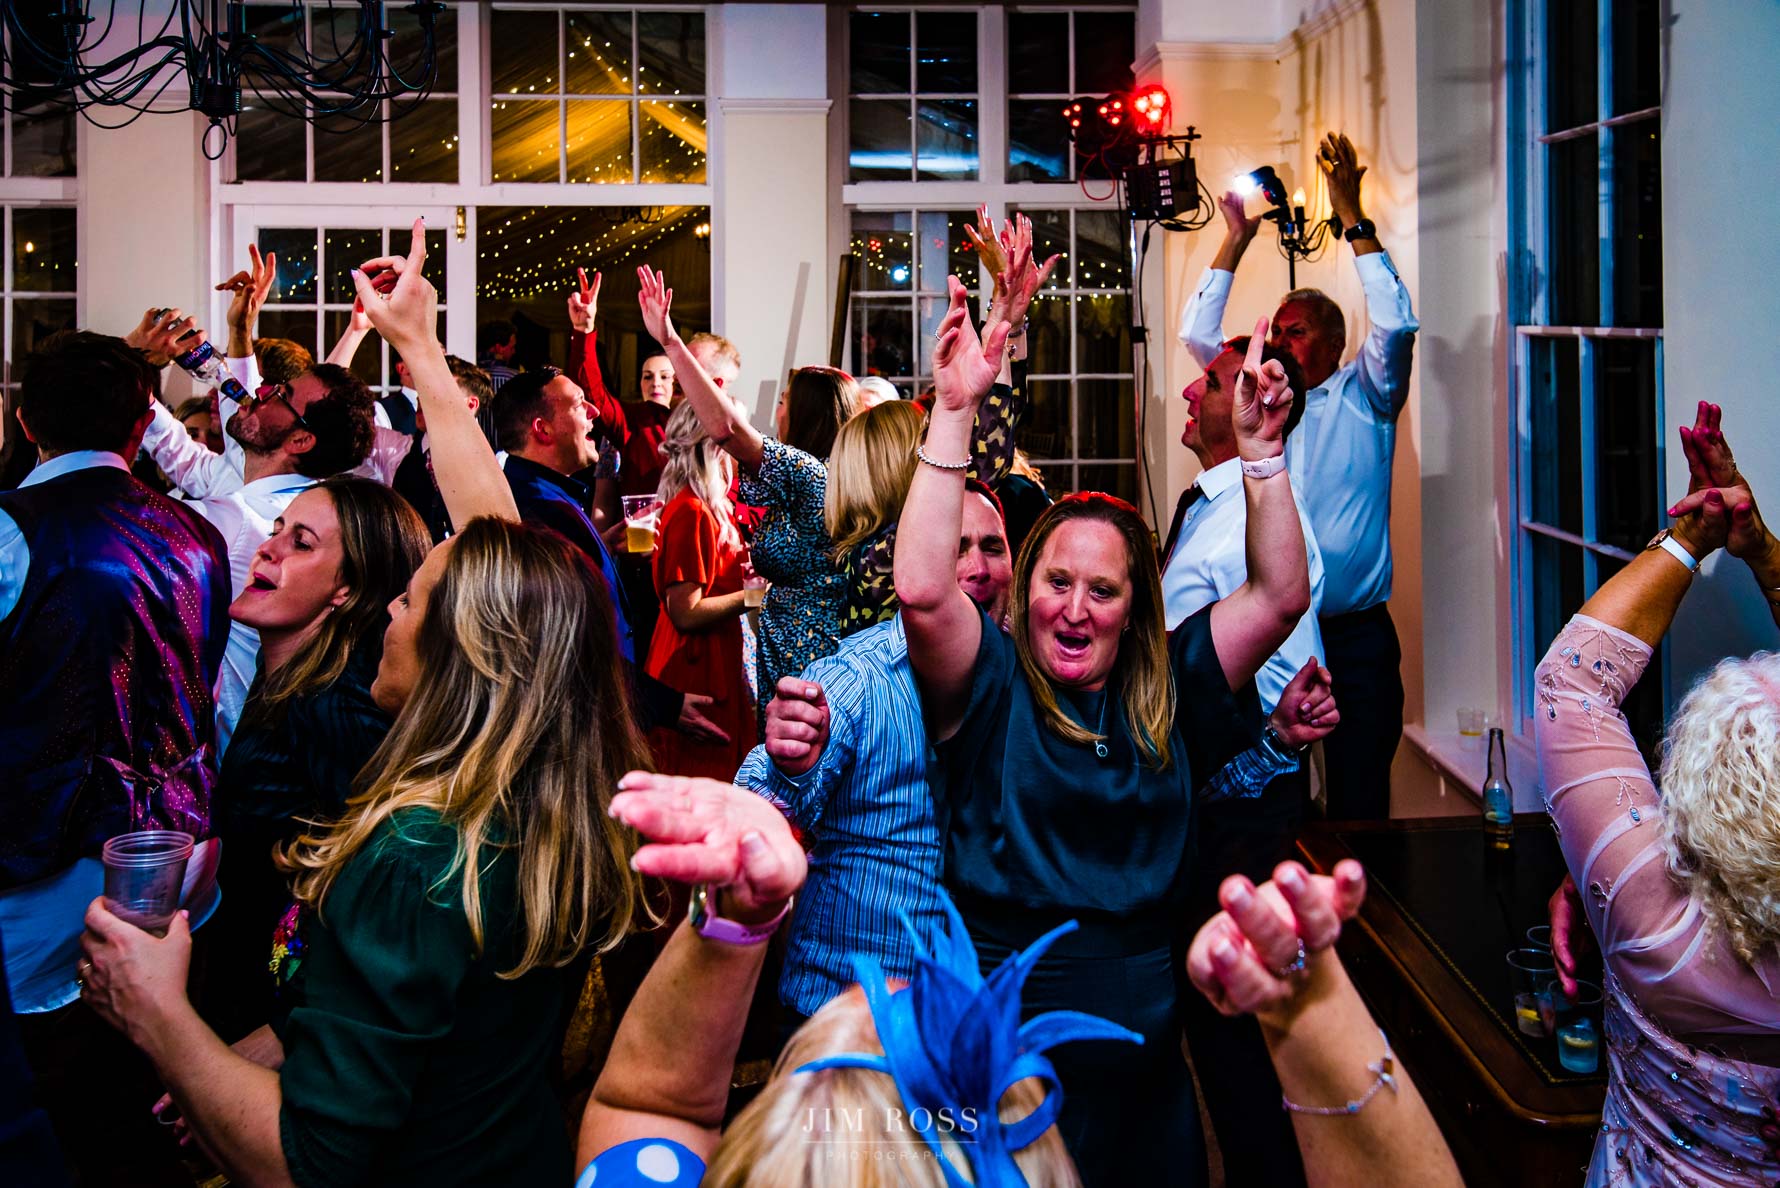 hands in the air for dancing wedding guests